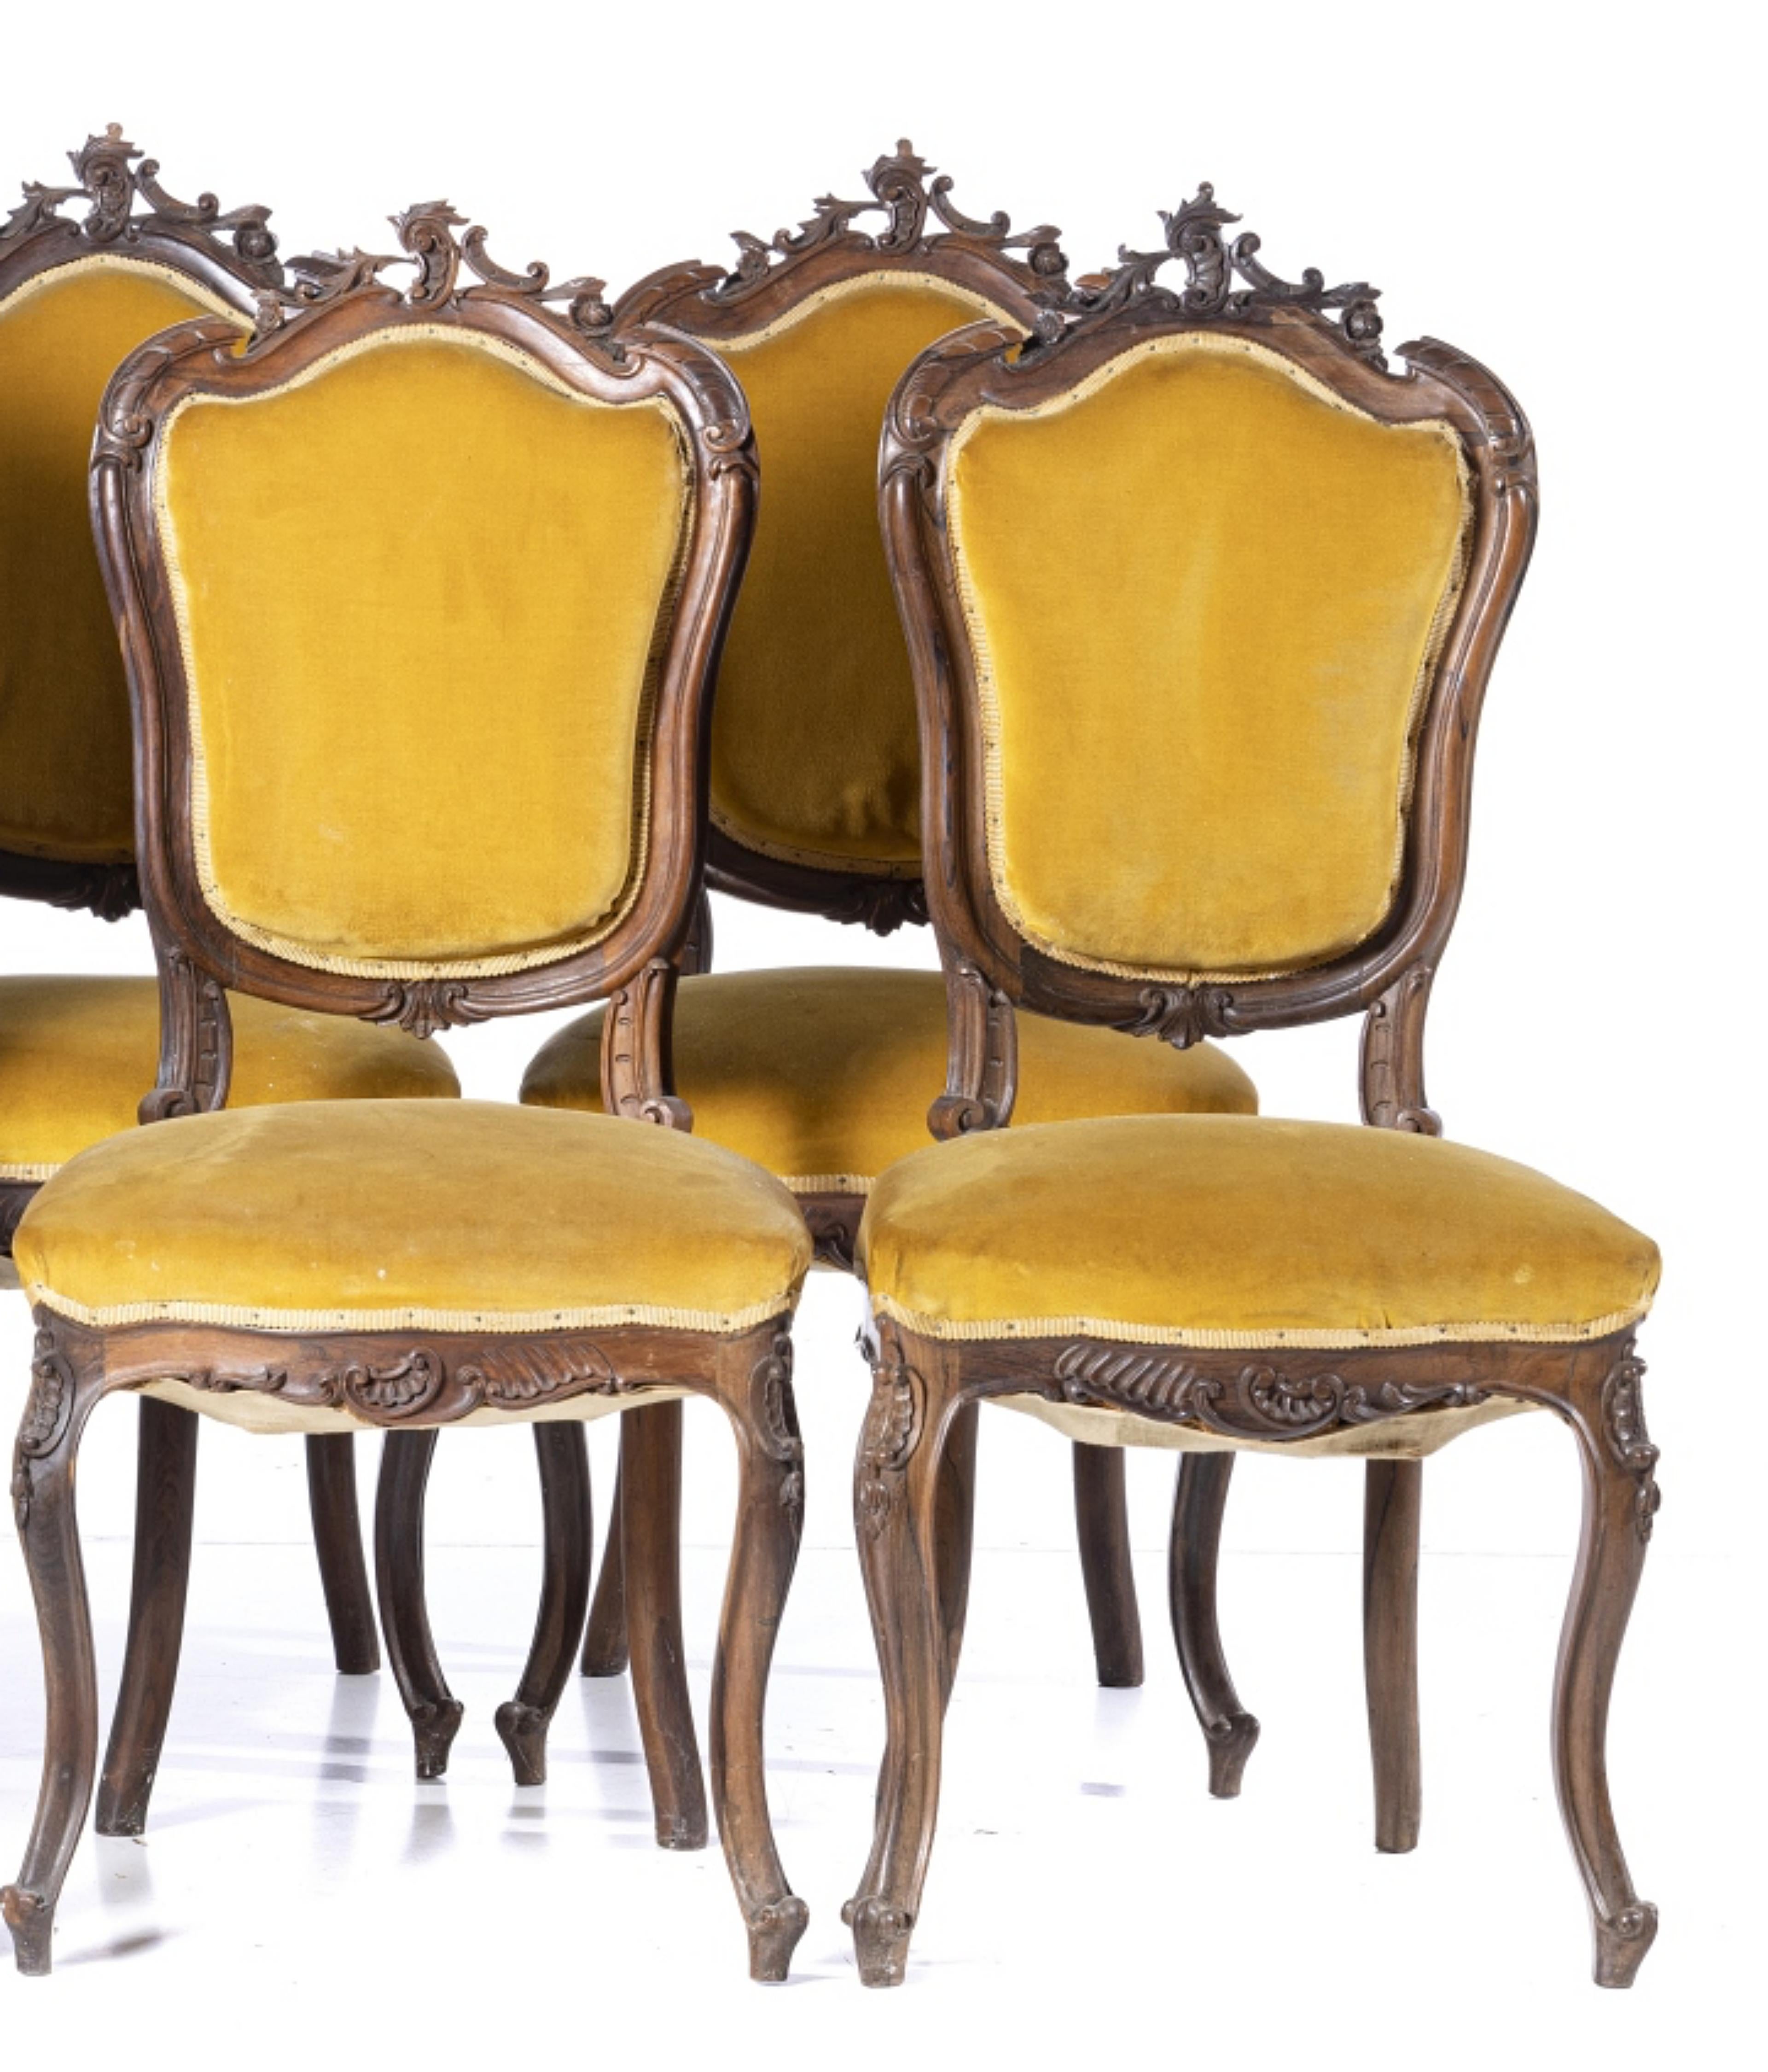 Baroque SET OF SIX LUIS XVI PORTUGUESE CHAIRS 19th Century For Sale